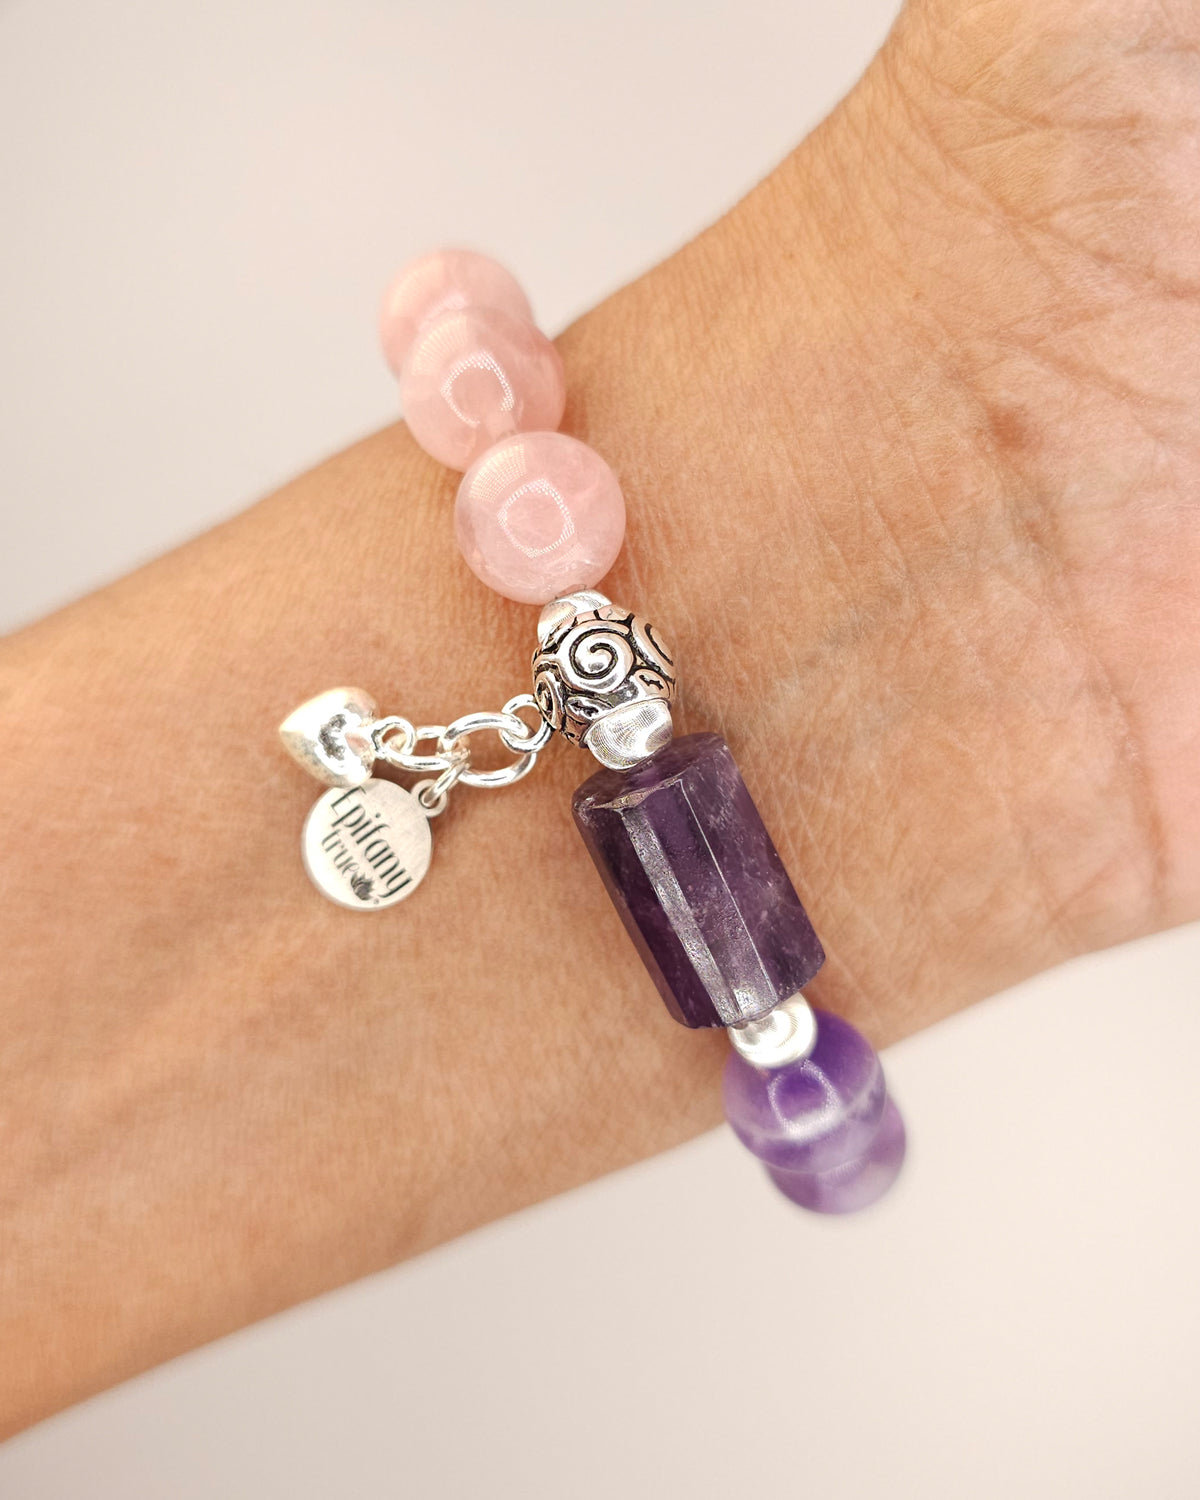 Strong Love Healing Intention Bracelet with Amethyst, Madagascar Rose Quartz and 925 Sterling Silver 7 inch